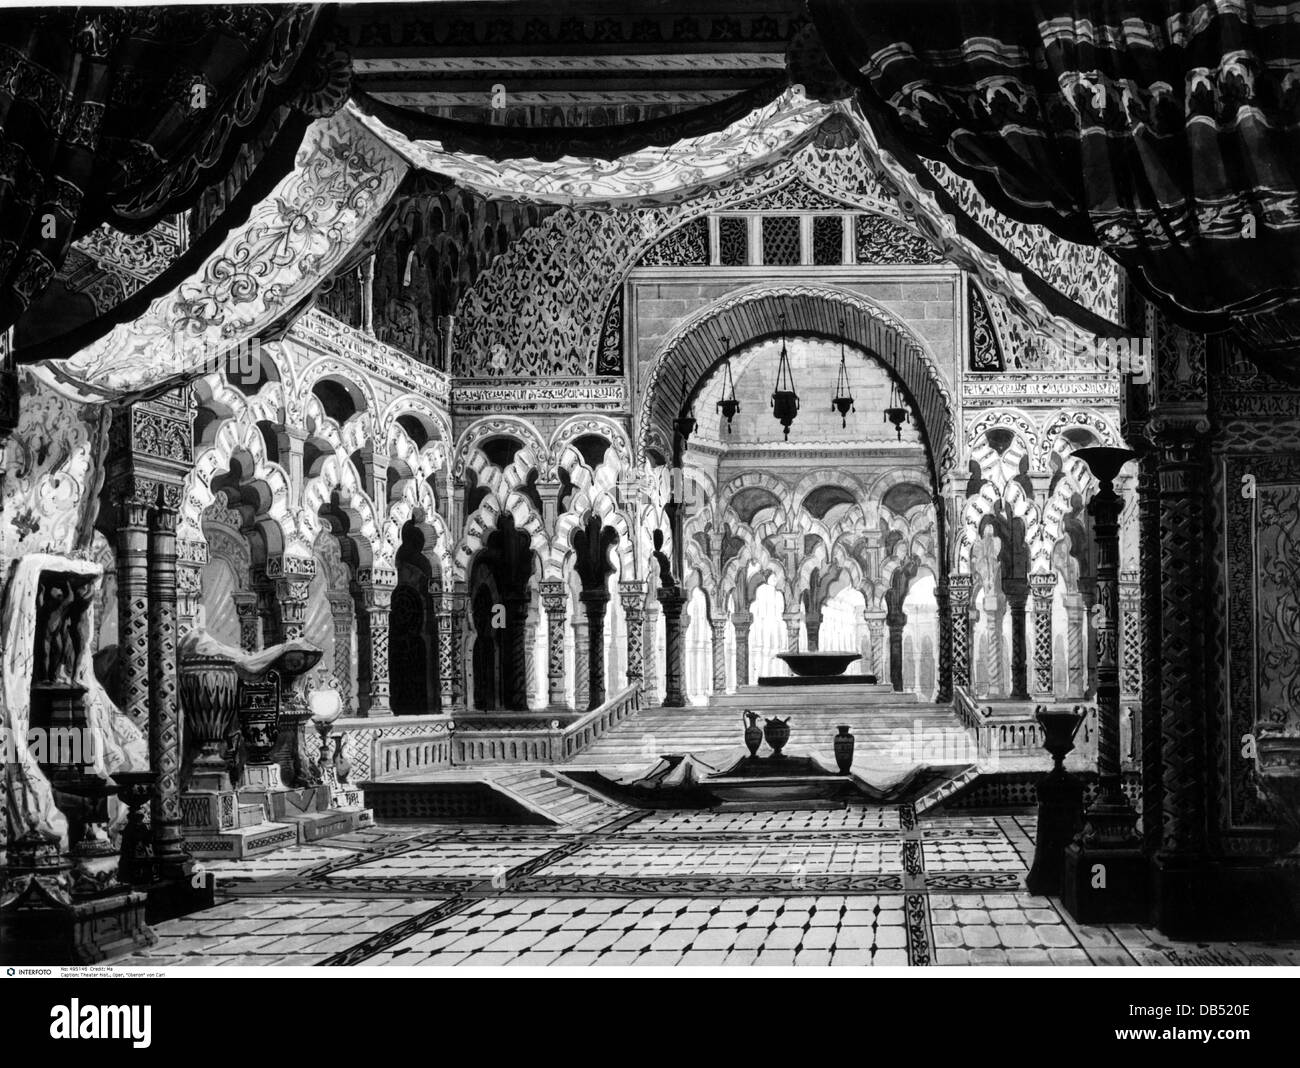 theatre / theater, opera, 'Oberon' by Carl Maria von Weber (1786 - 1826), stage design by Brioschi, 1870, Additional-Rights-Clearences-Not Available Stock Photo